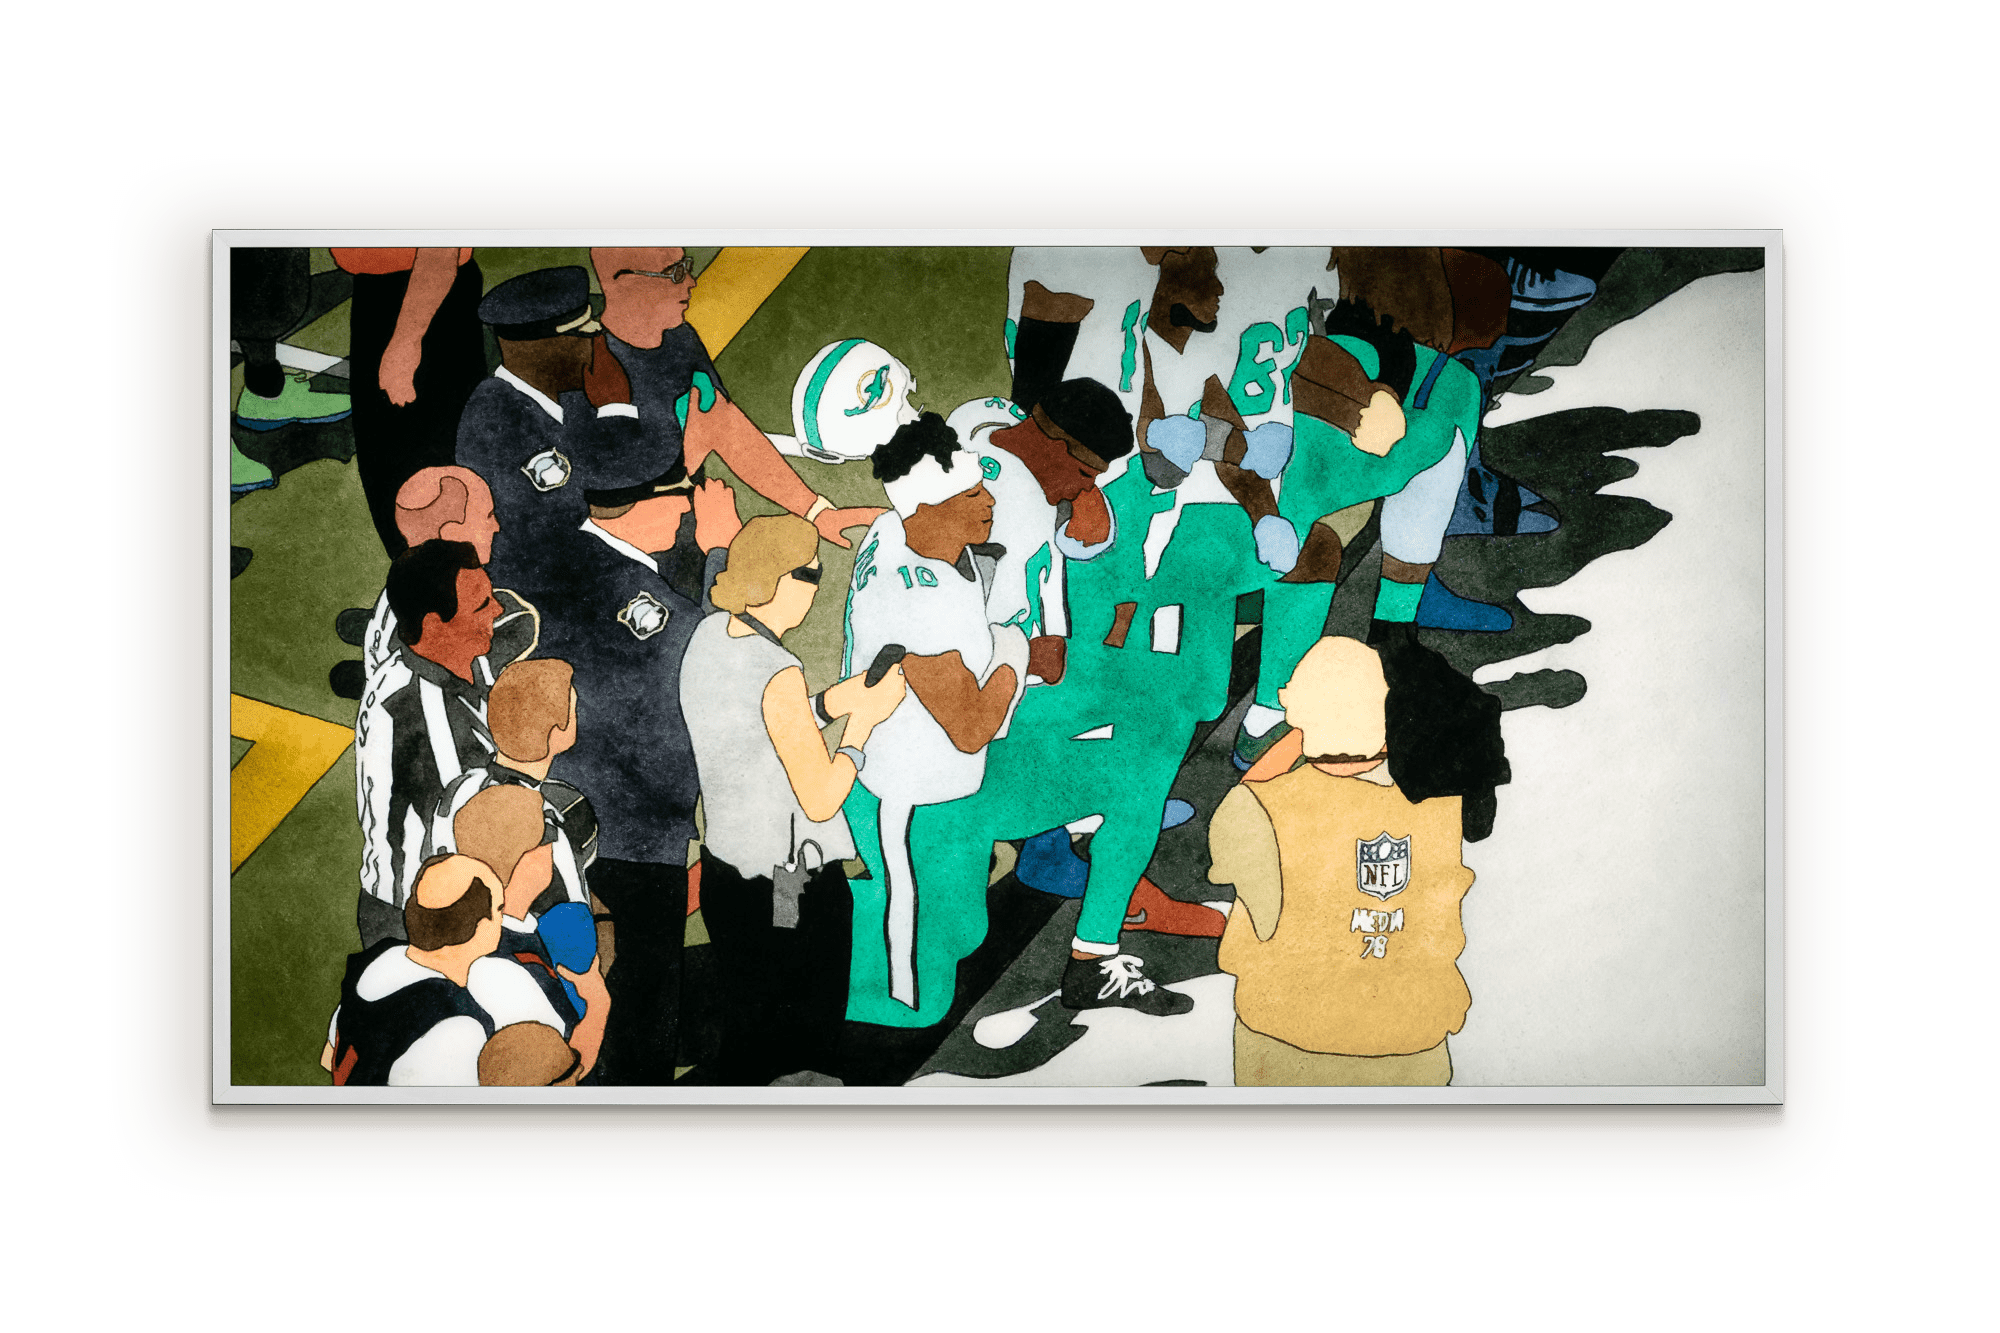 Kota Ezawa National Anthem (Miami Dolphins), 2019 Duratrans transparency and lightbox 25 x 44 inches (63.5 x 111.8 cm) Edition of 5